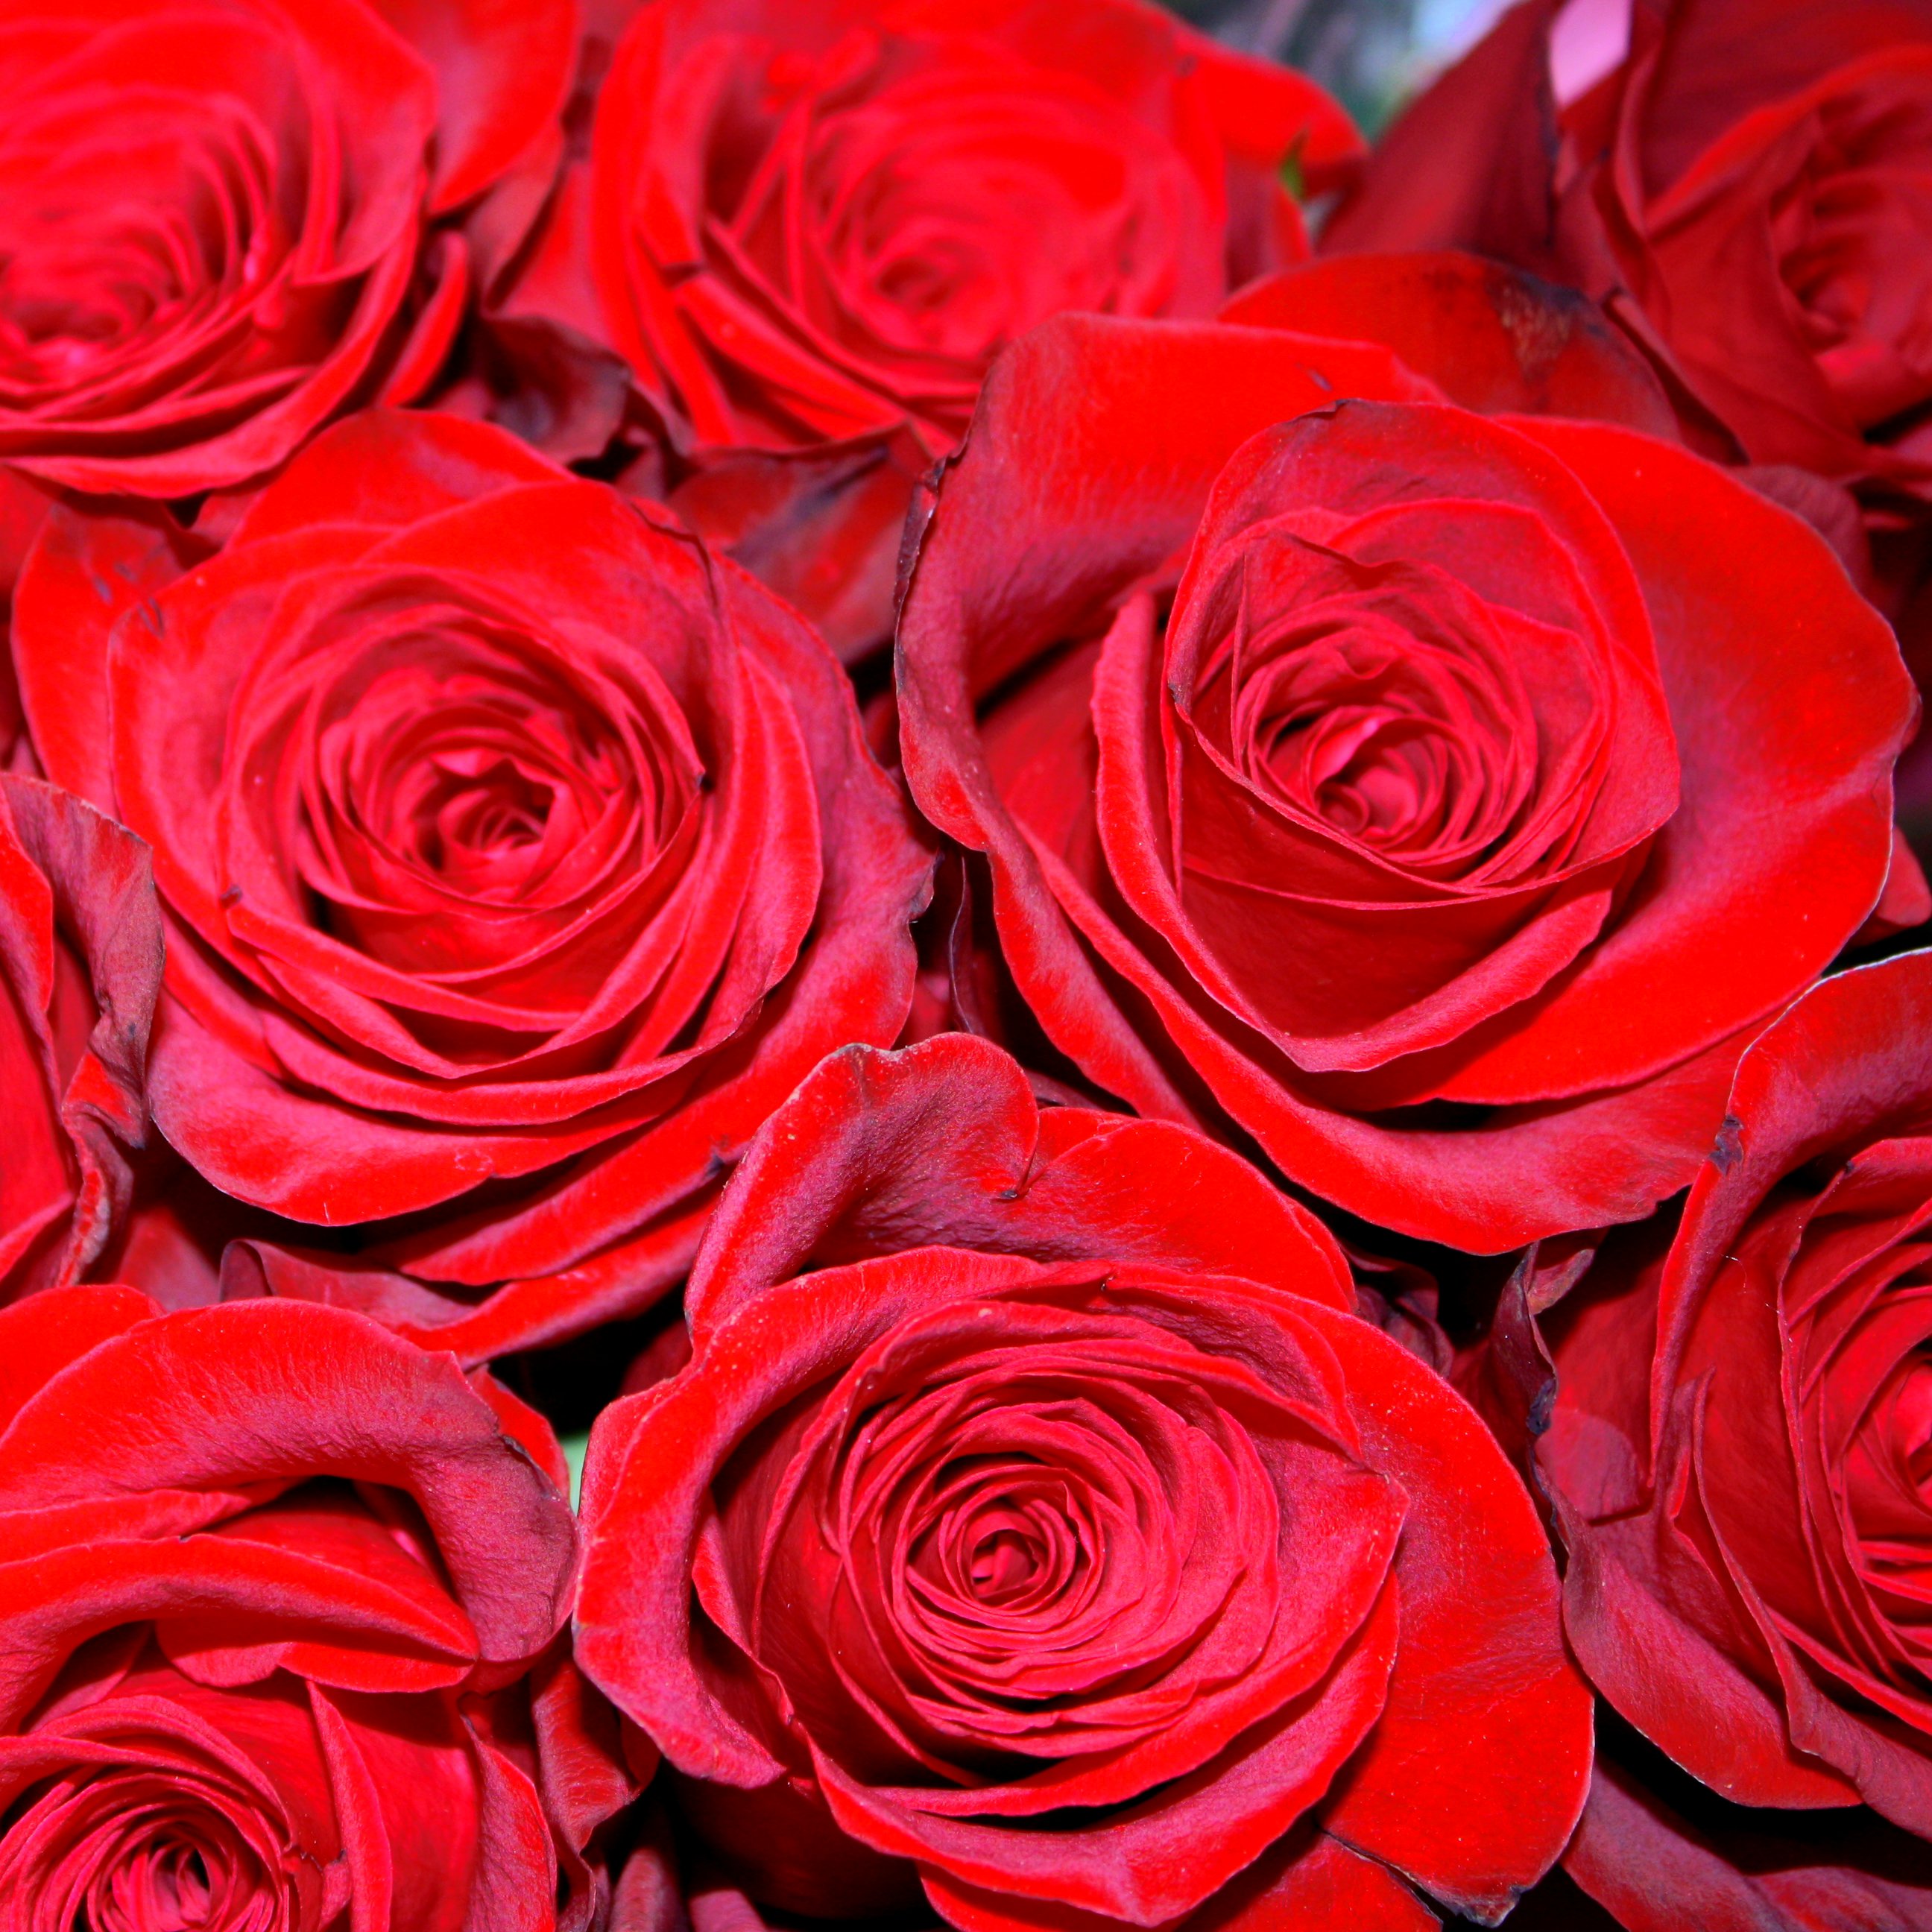 Red Roses Picture Free Photograph Photos Public Domain